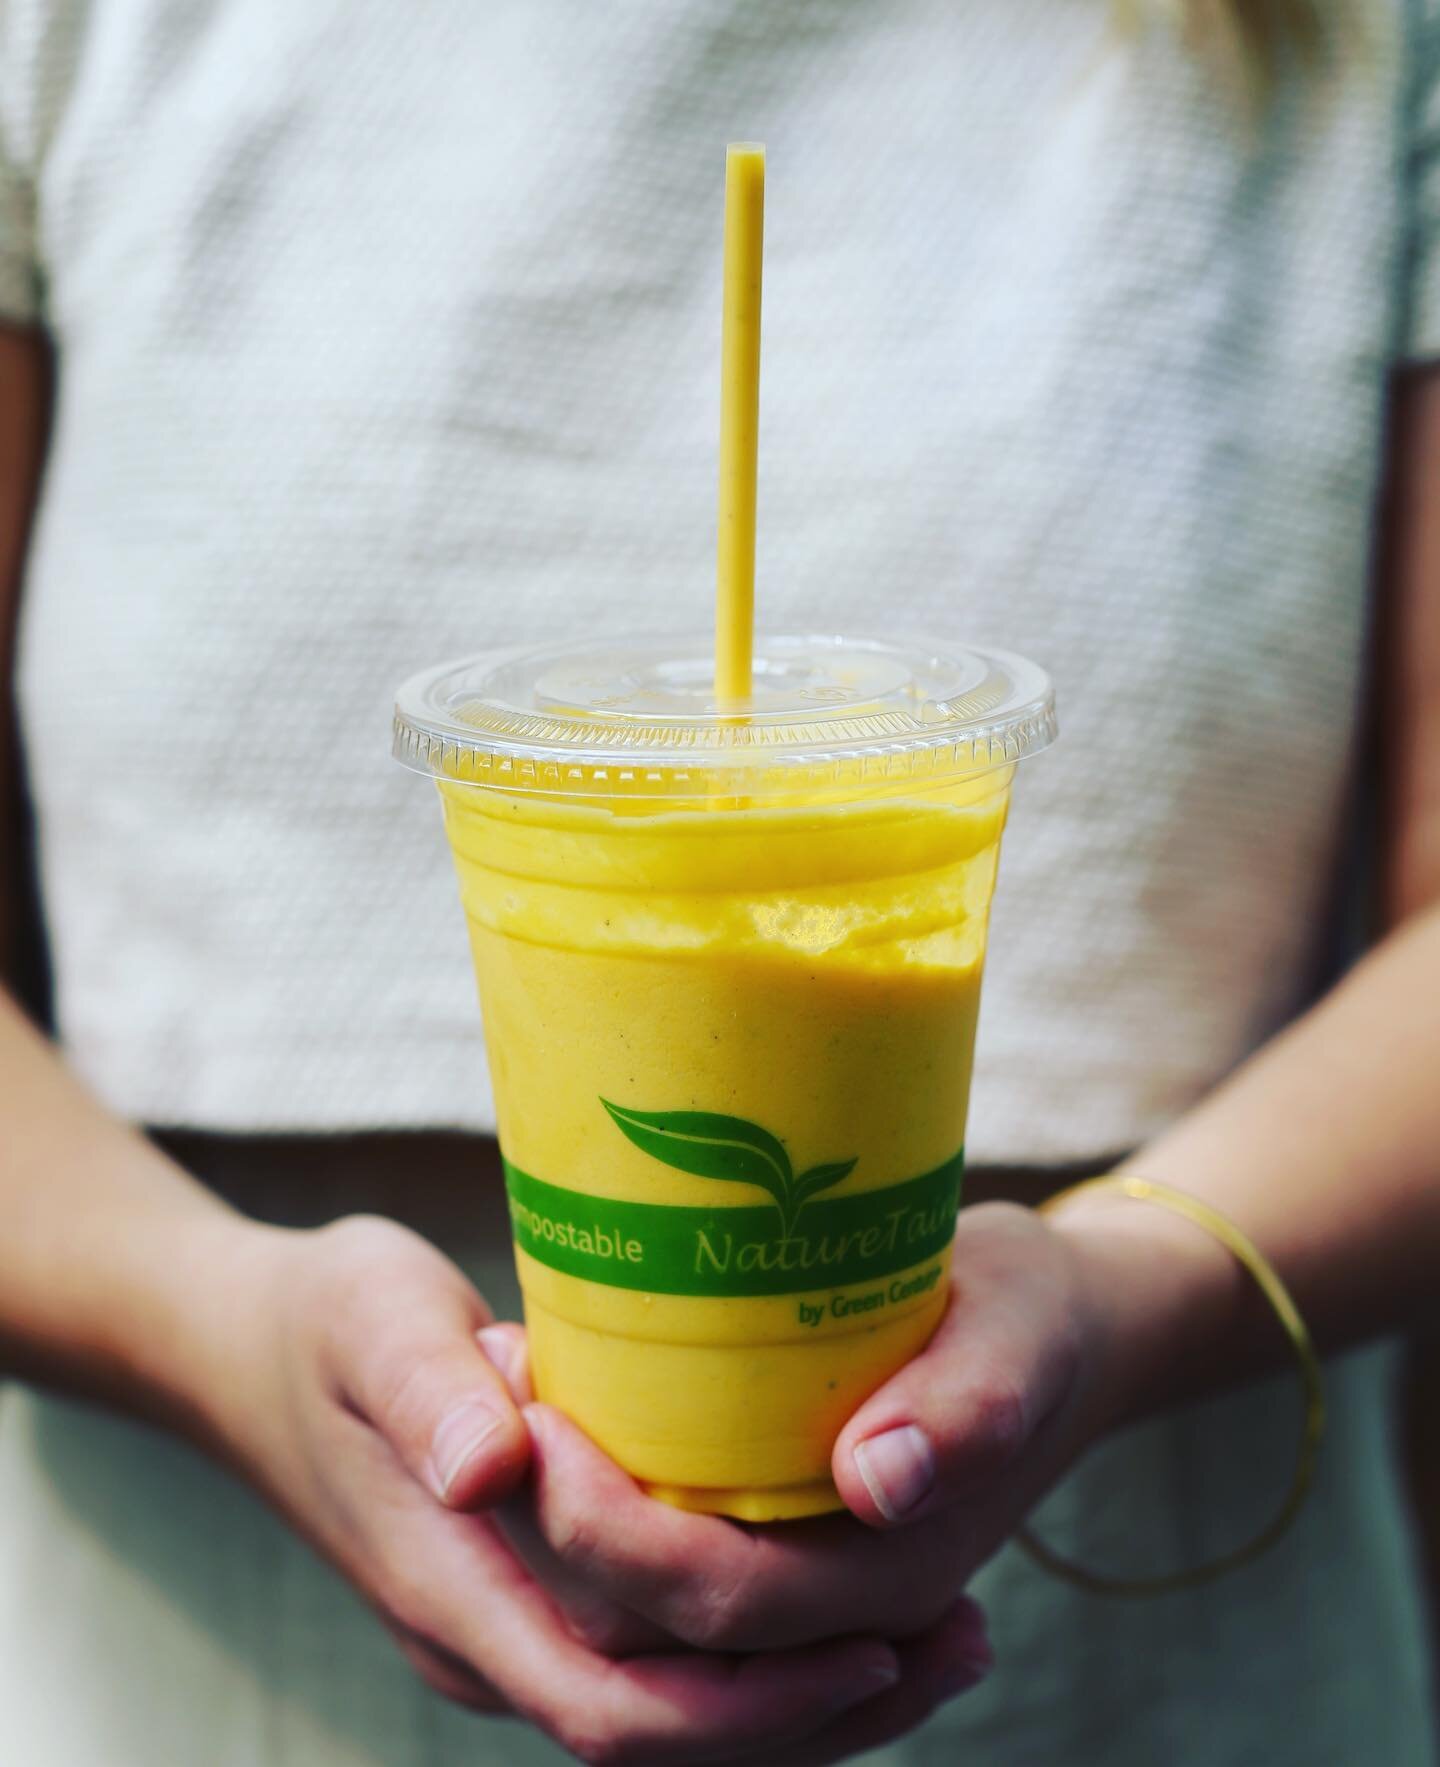 Grab our fermenter coconut mango lassi on the truck! Made with local company @blueheroncheese! We will be on commercial and Charles street today 😋😋😋 #eastiseast #plantbased #vegan #healthyfood #foodtruck